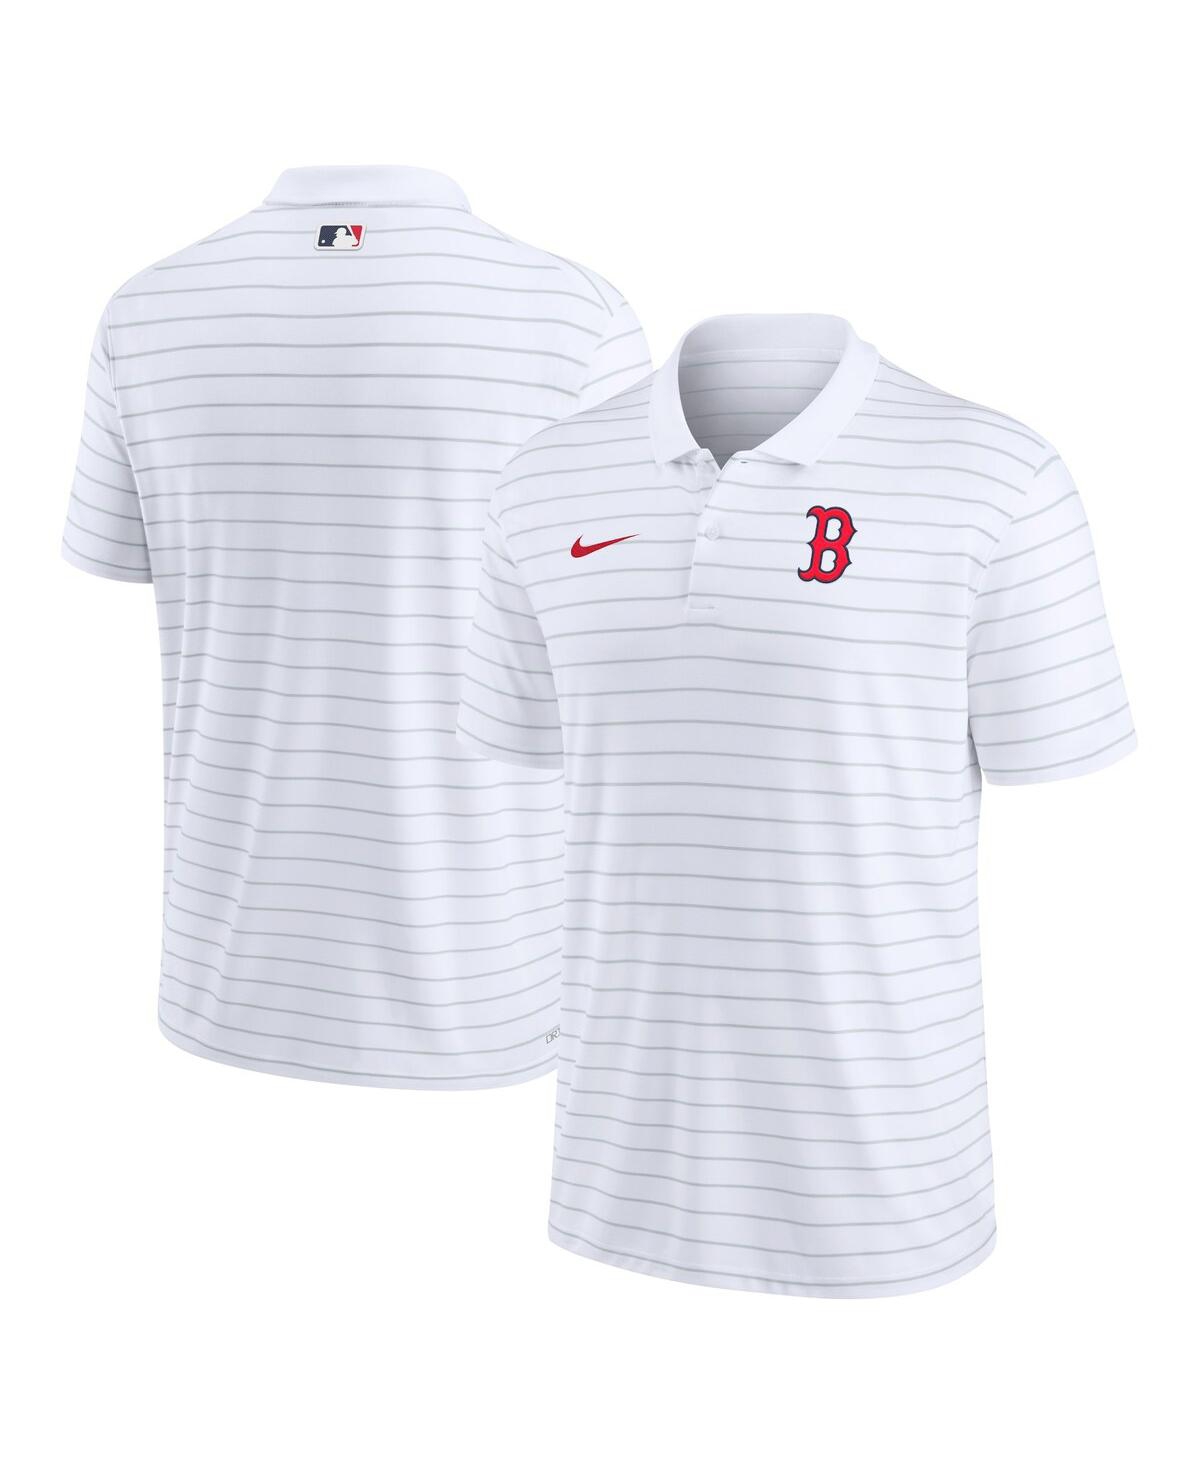 Men's Nike White Boston Red Sox Authentic Collection Victory Striped Performance Polo Shirt - White